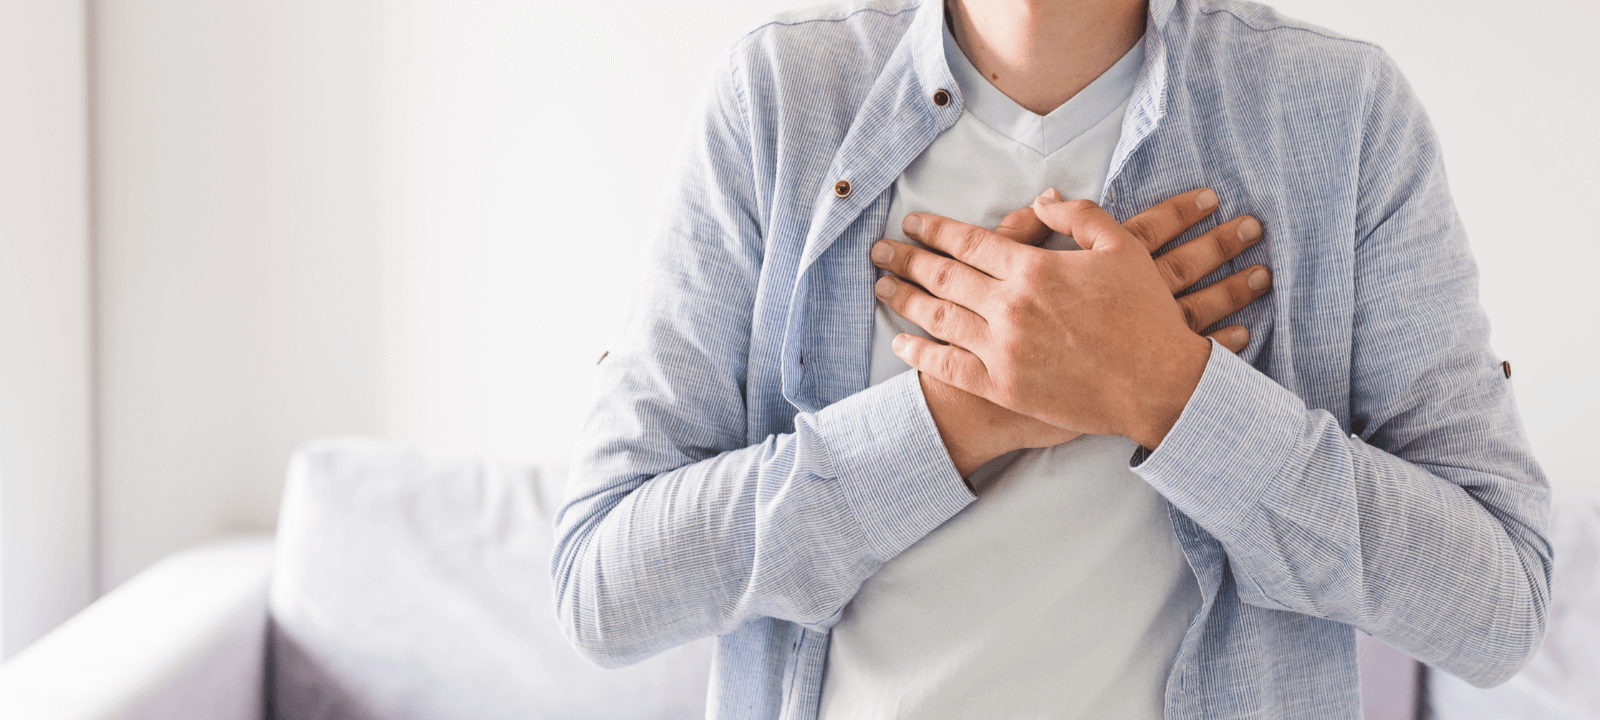 Know The Difference Between Gas Pain In The Chest & Heart Attack